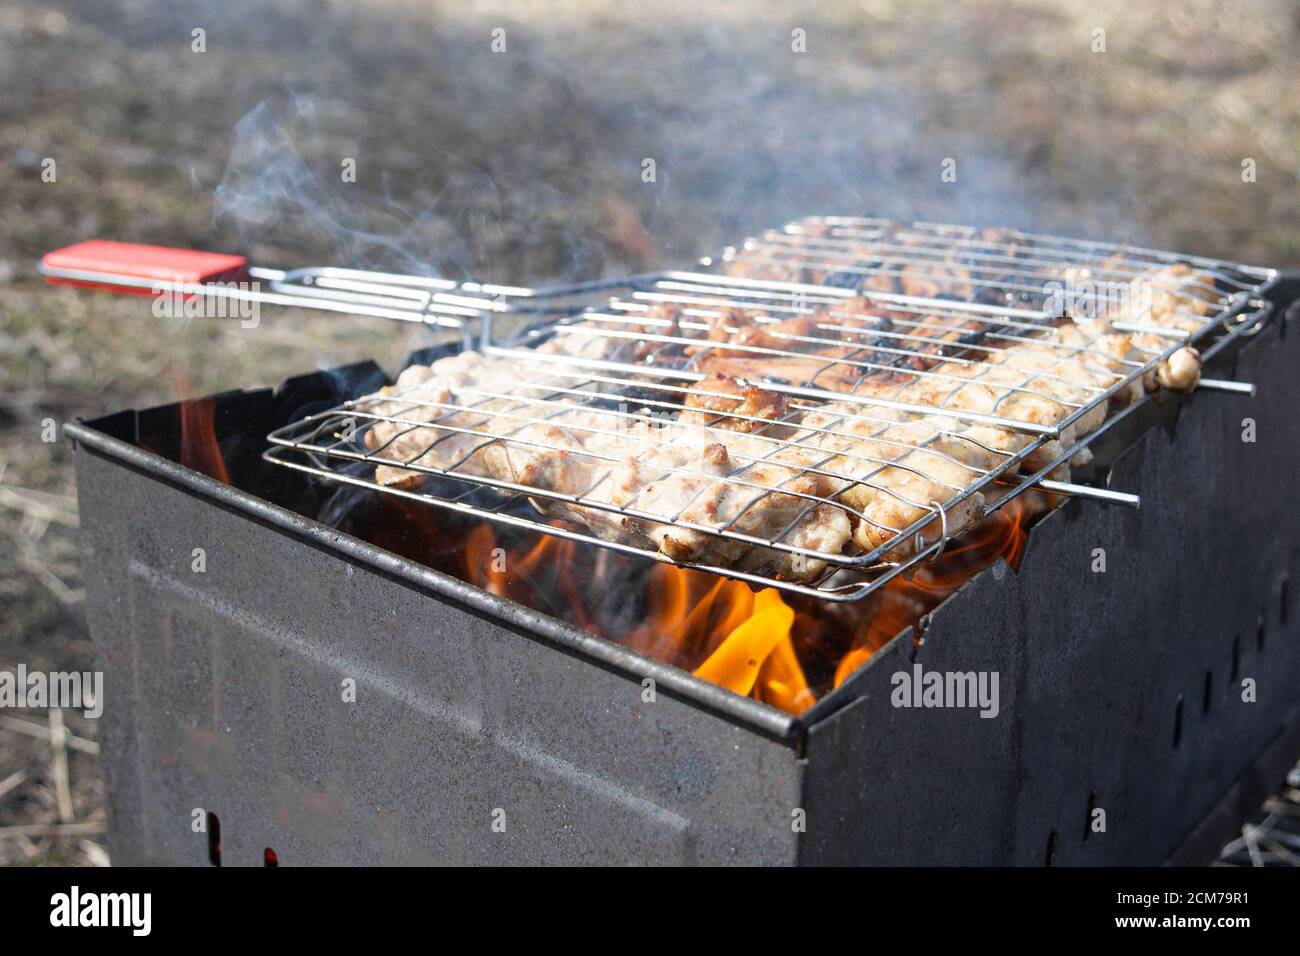 Chicken legs and wings on the grill, Fire in the grill for a barbecue party, outdoors Stock Photo